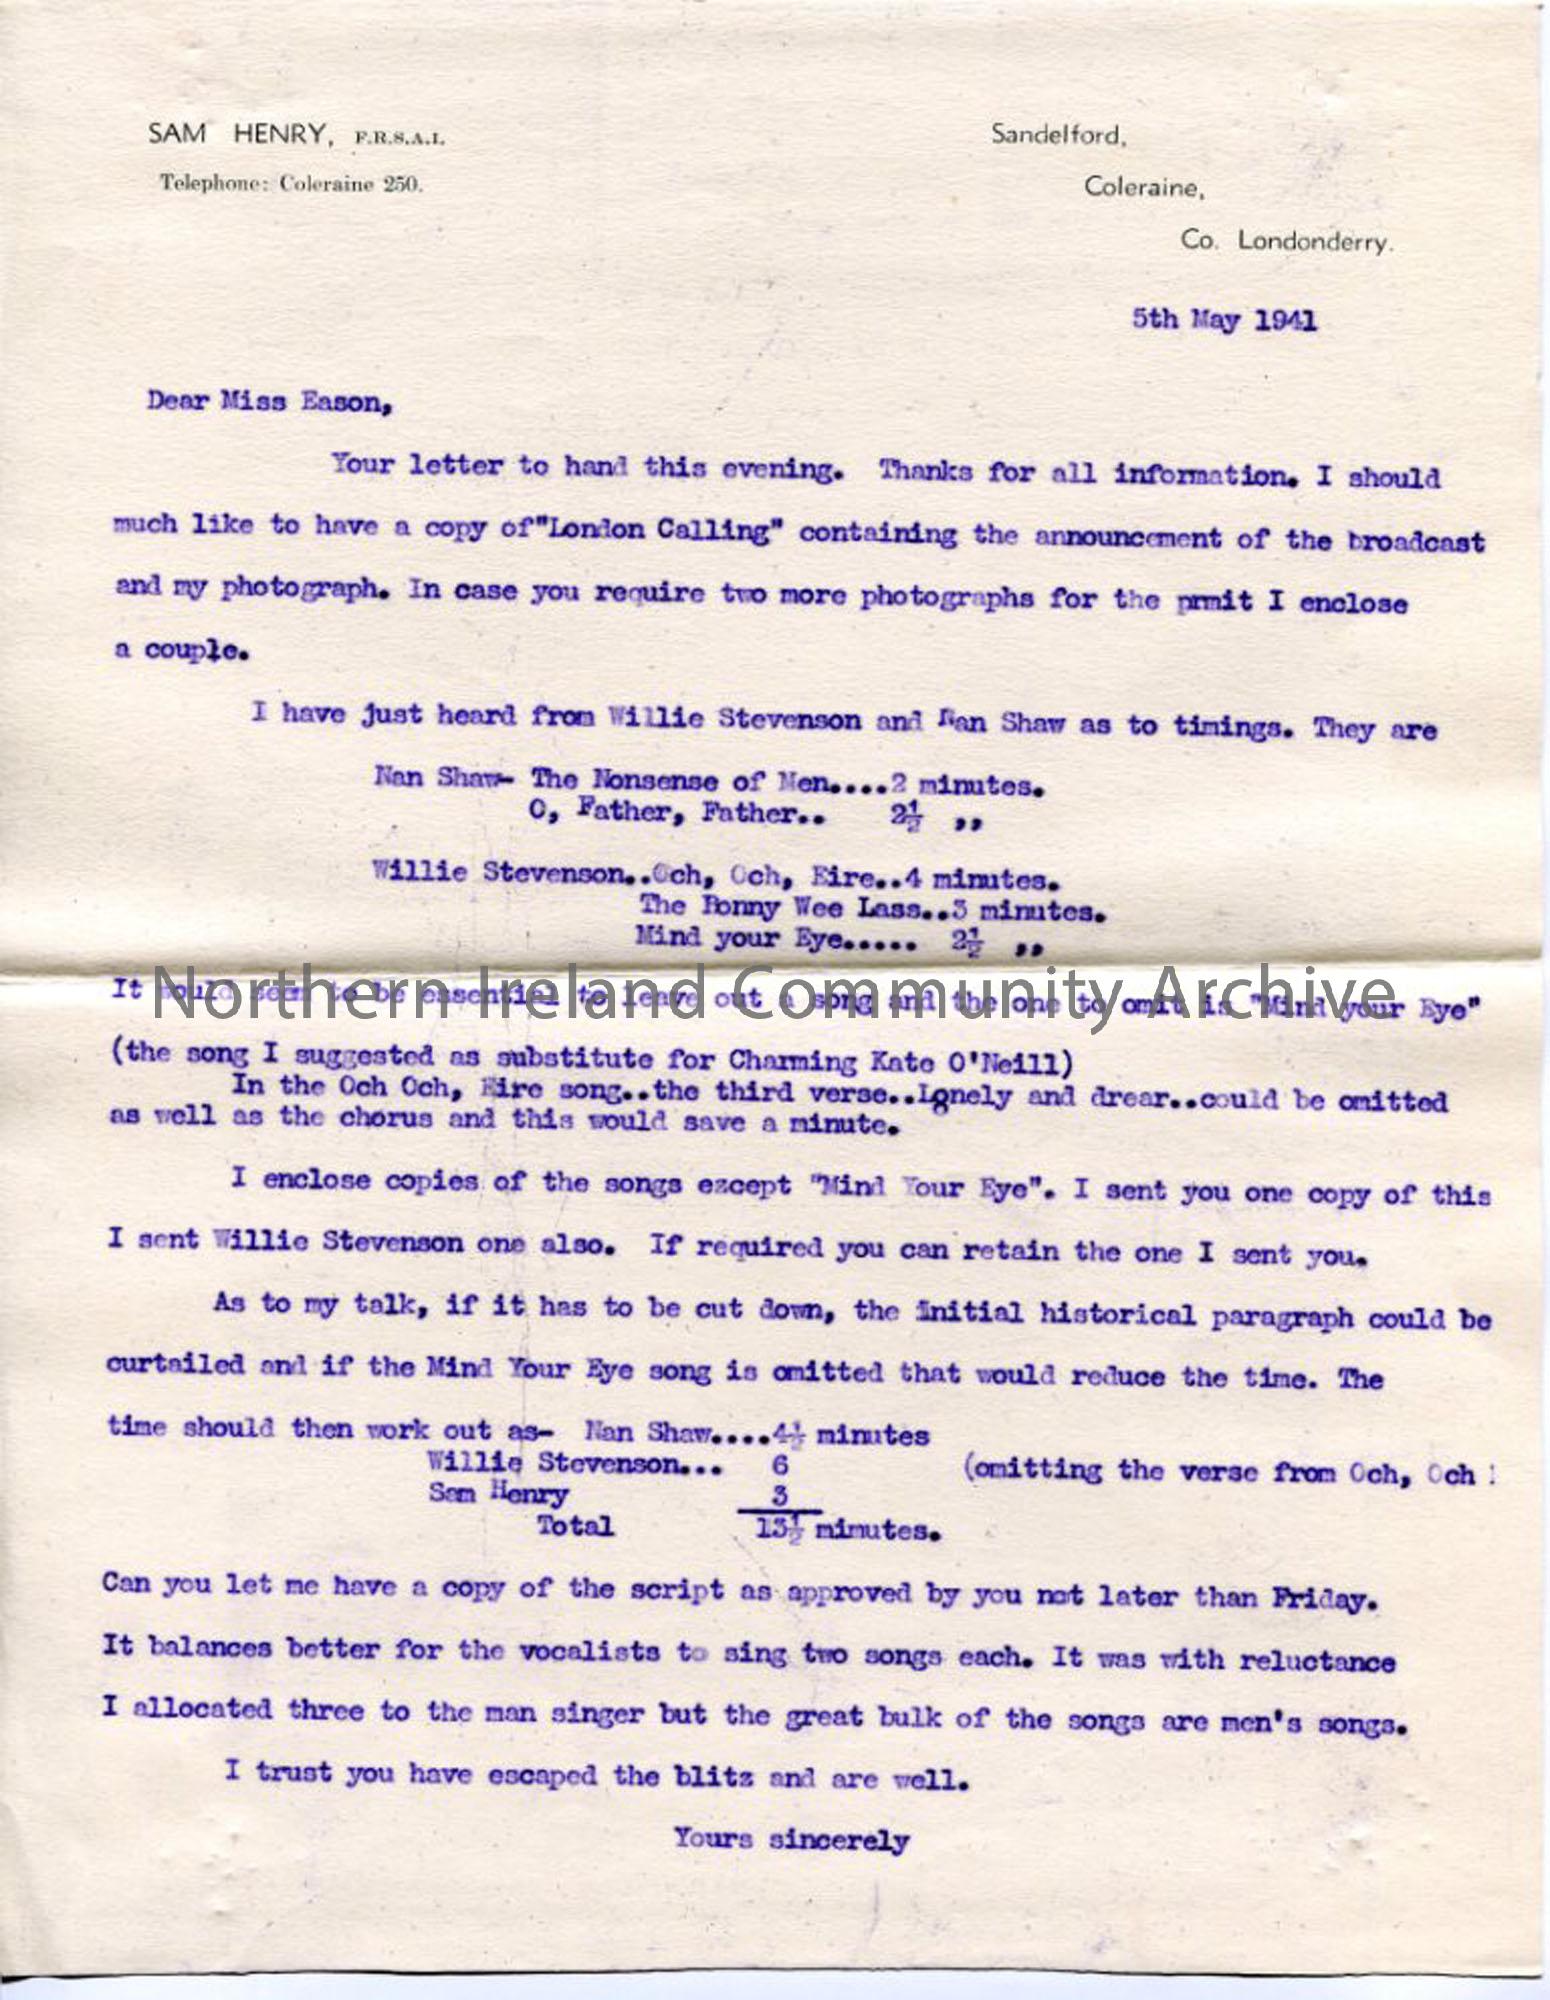 Letter to Miss Eason of the BBC from Sam Henry, dated 5.5.1941